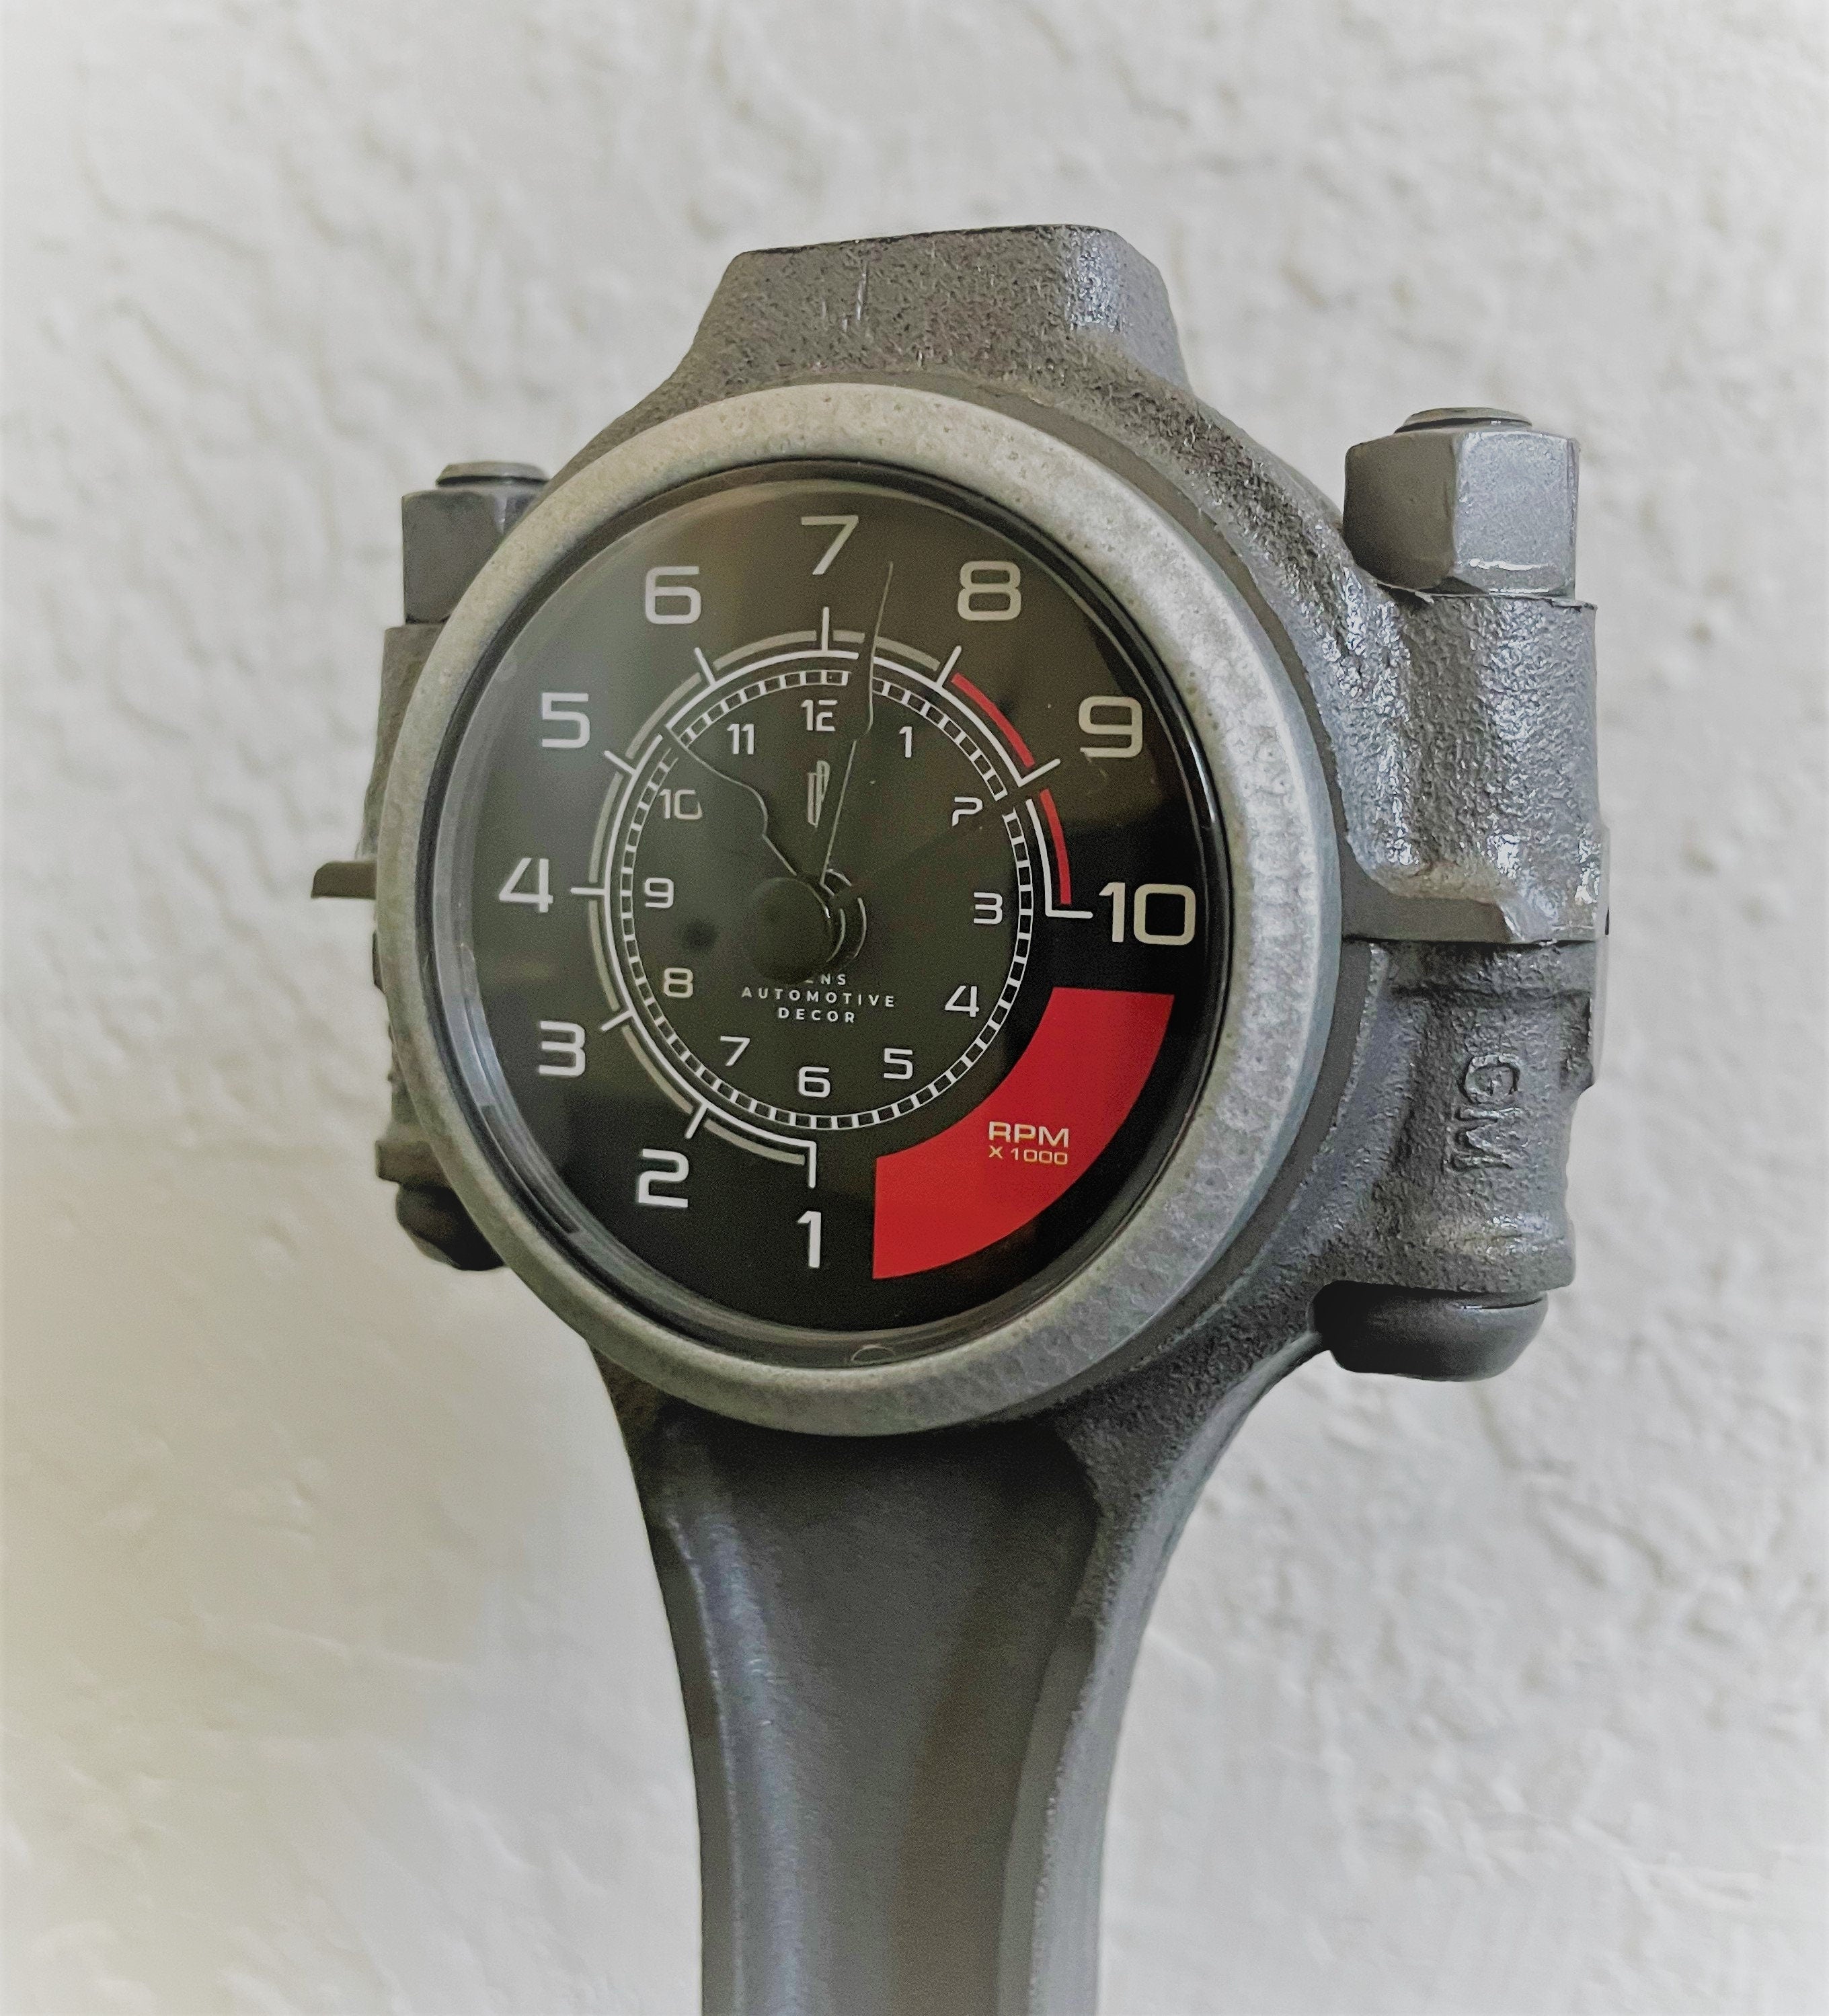 Close-up view of a car piston clock finished in gunmetal gray with a silver clock ring and black and red RPM clock face.